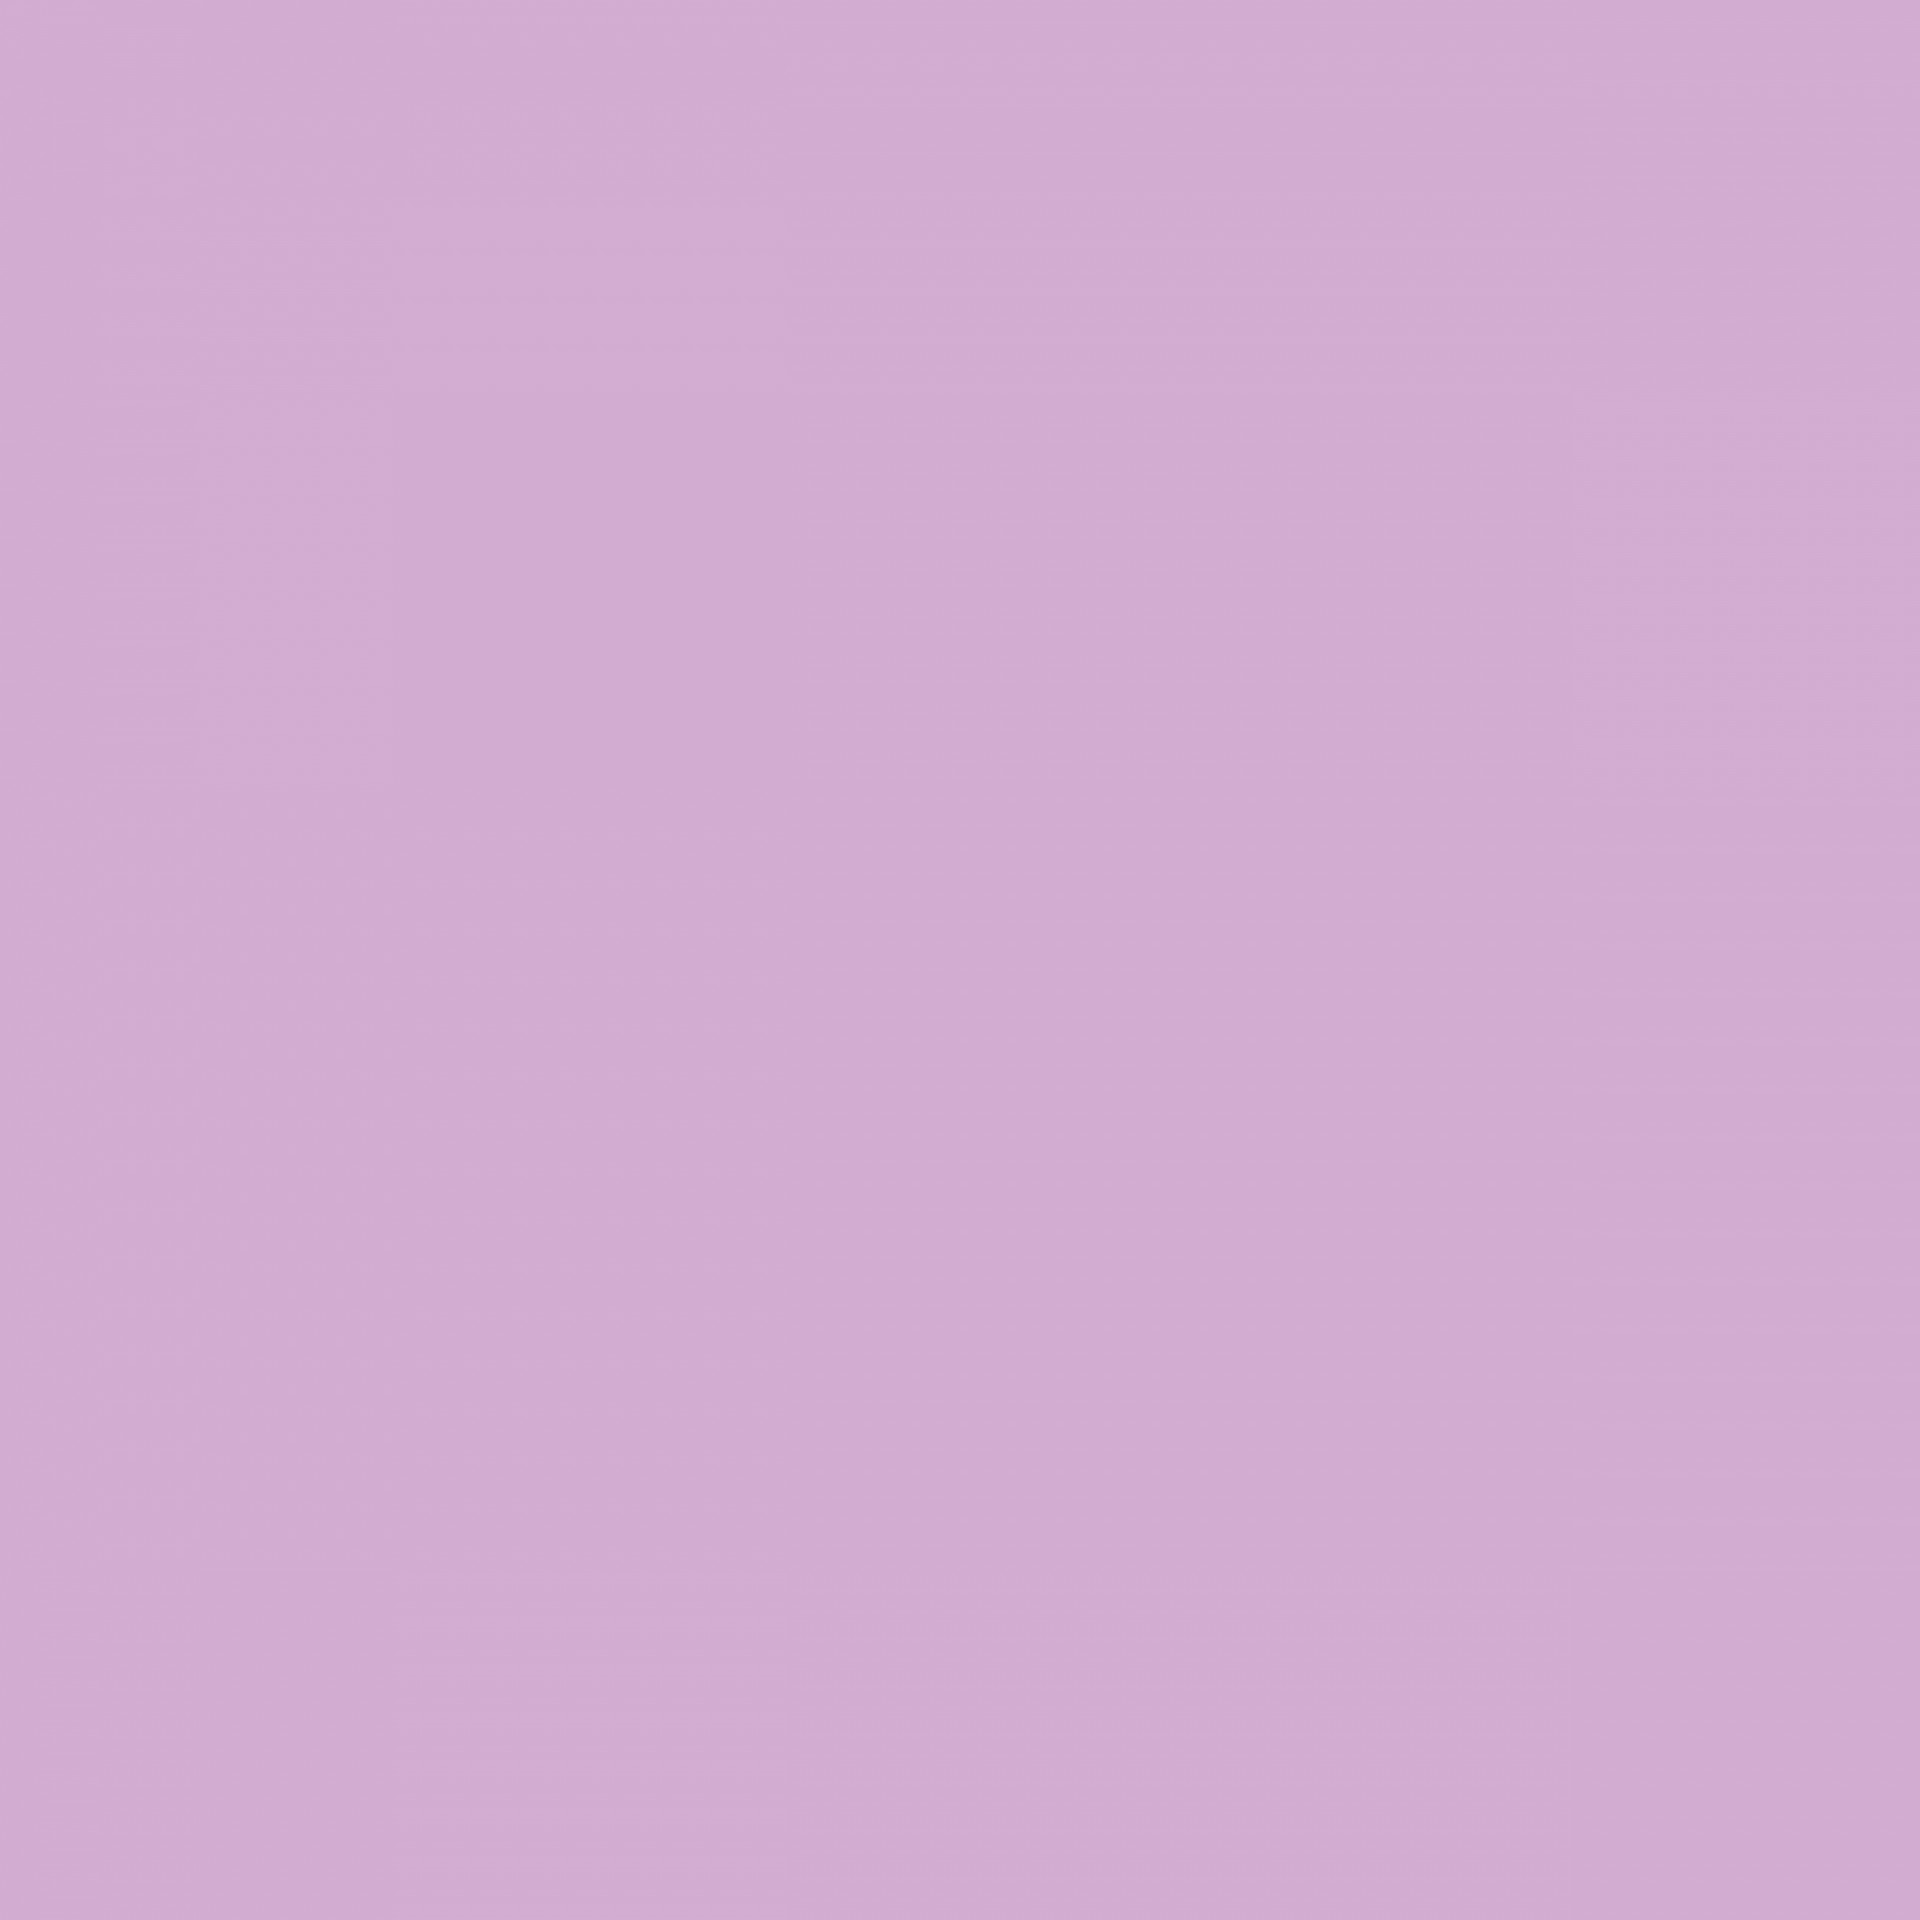 Download free photo of Lavender,violet,color,plain,background - from  